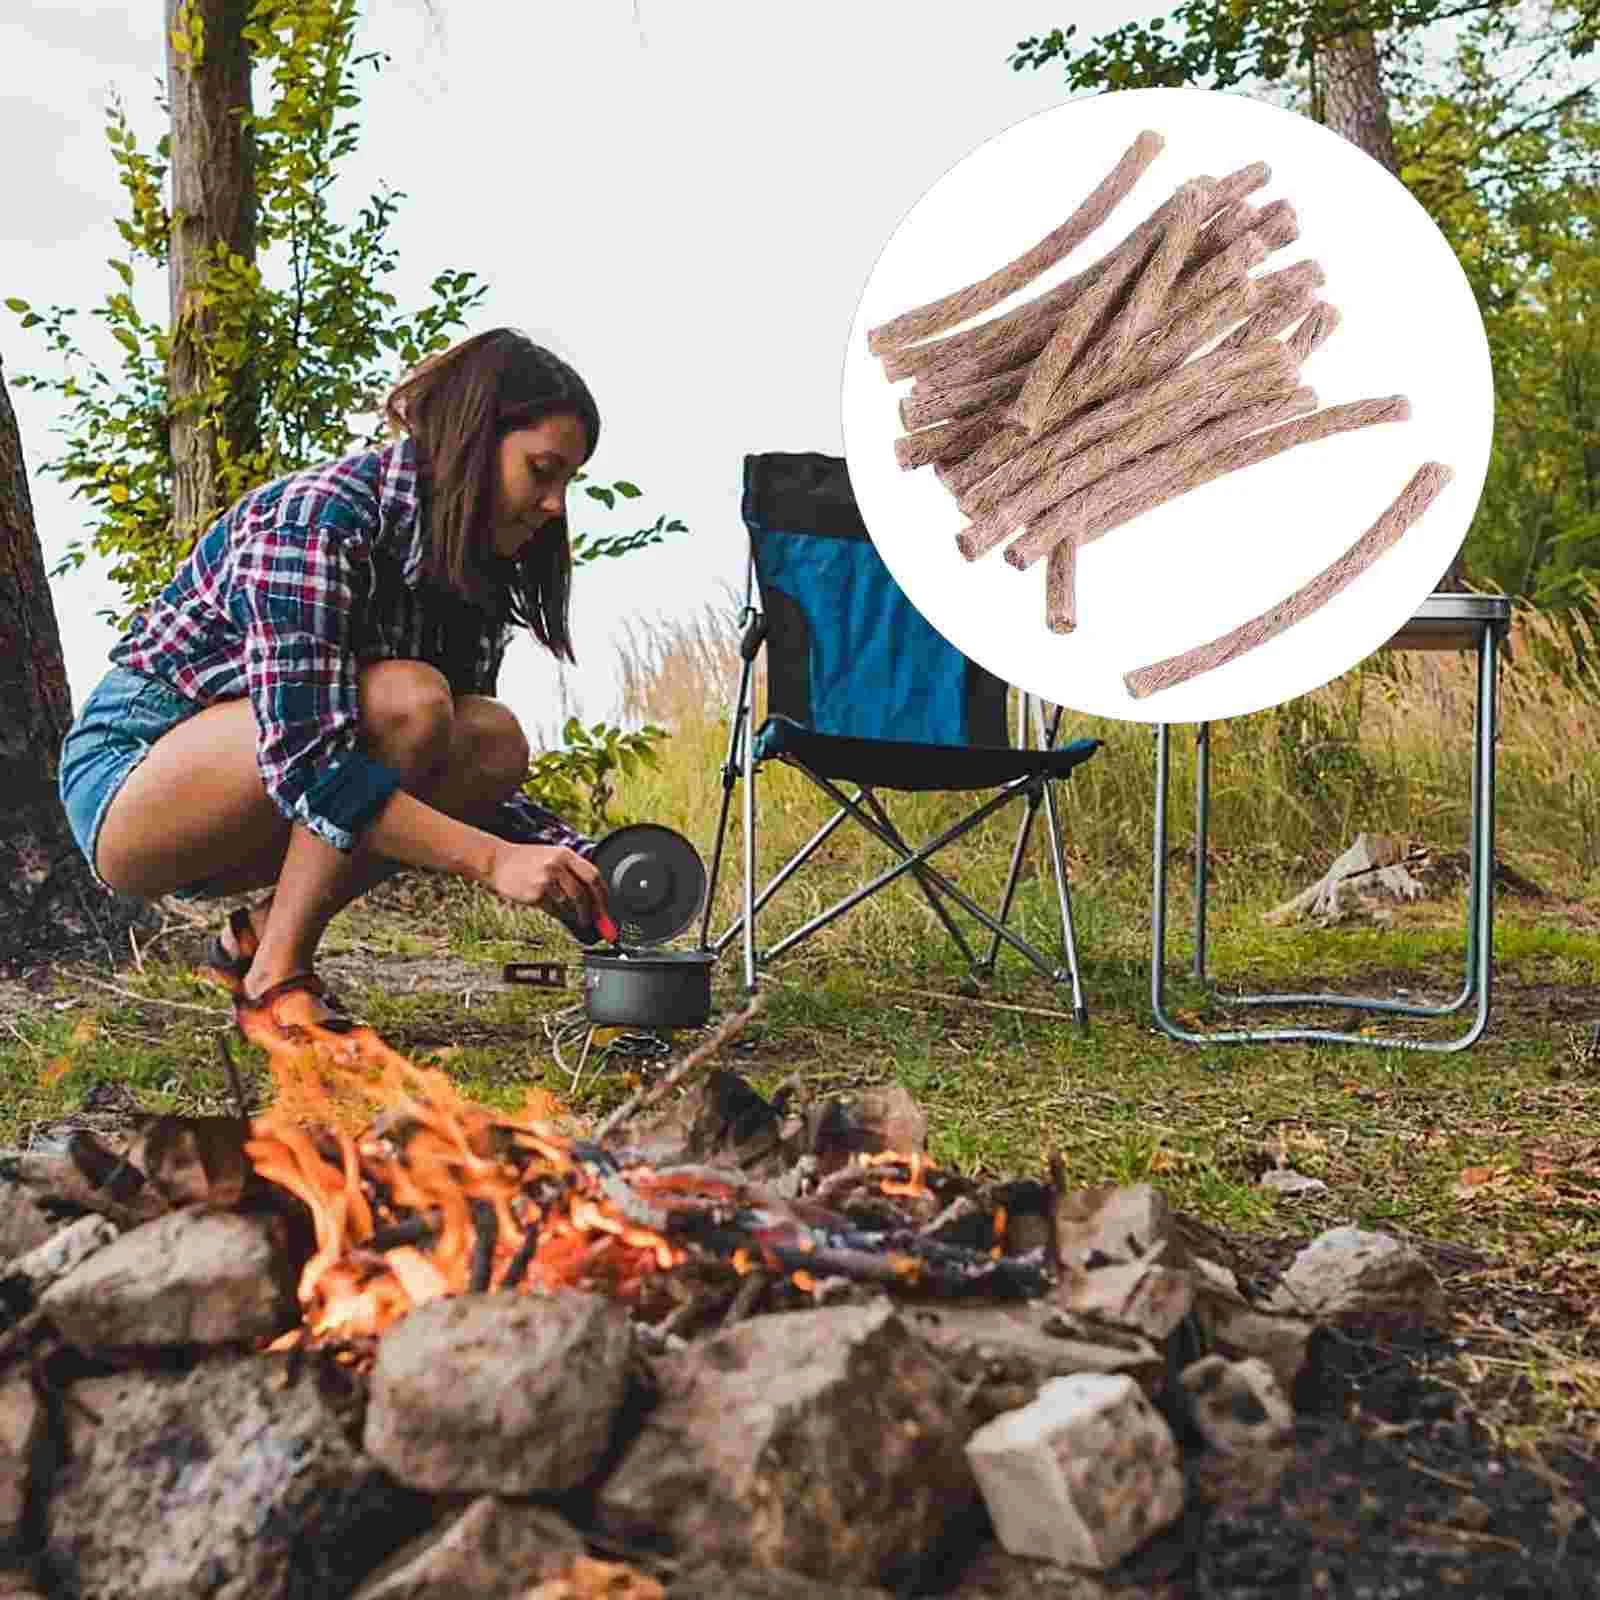 

20 Pcs Kindling Rope Tinder Backpack Camping Bellows Wick Fire Starters Travel Lighters